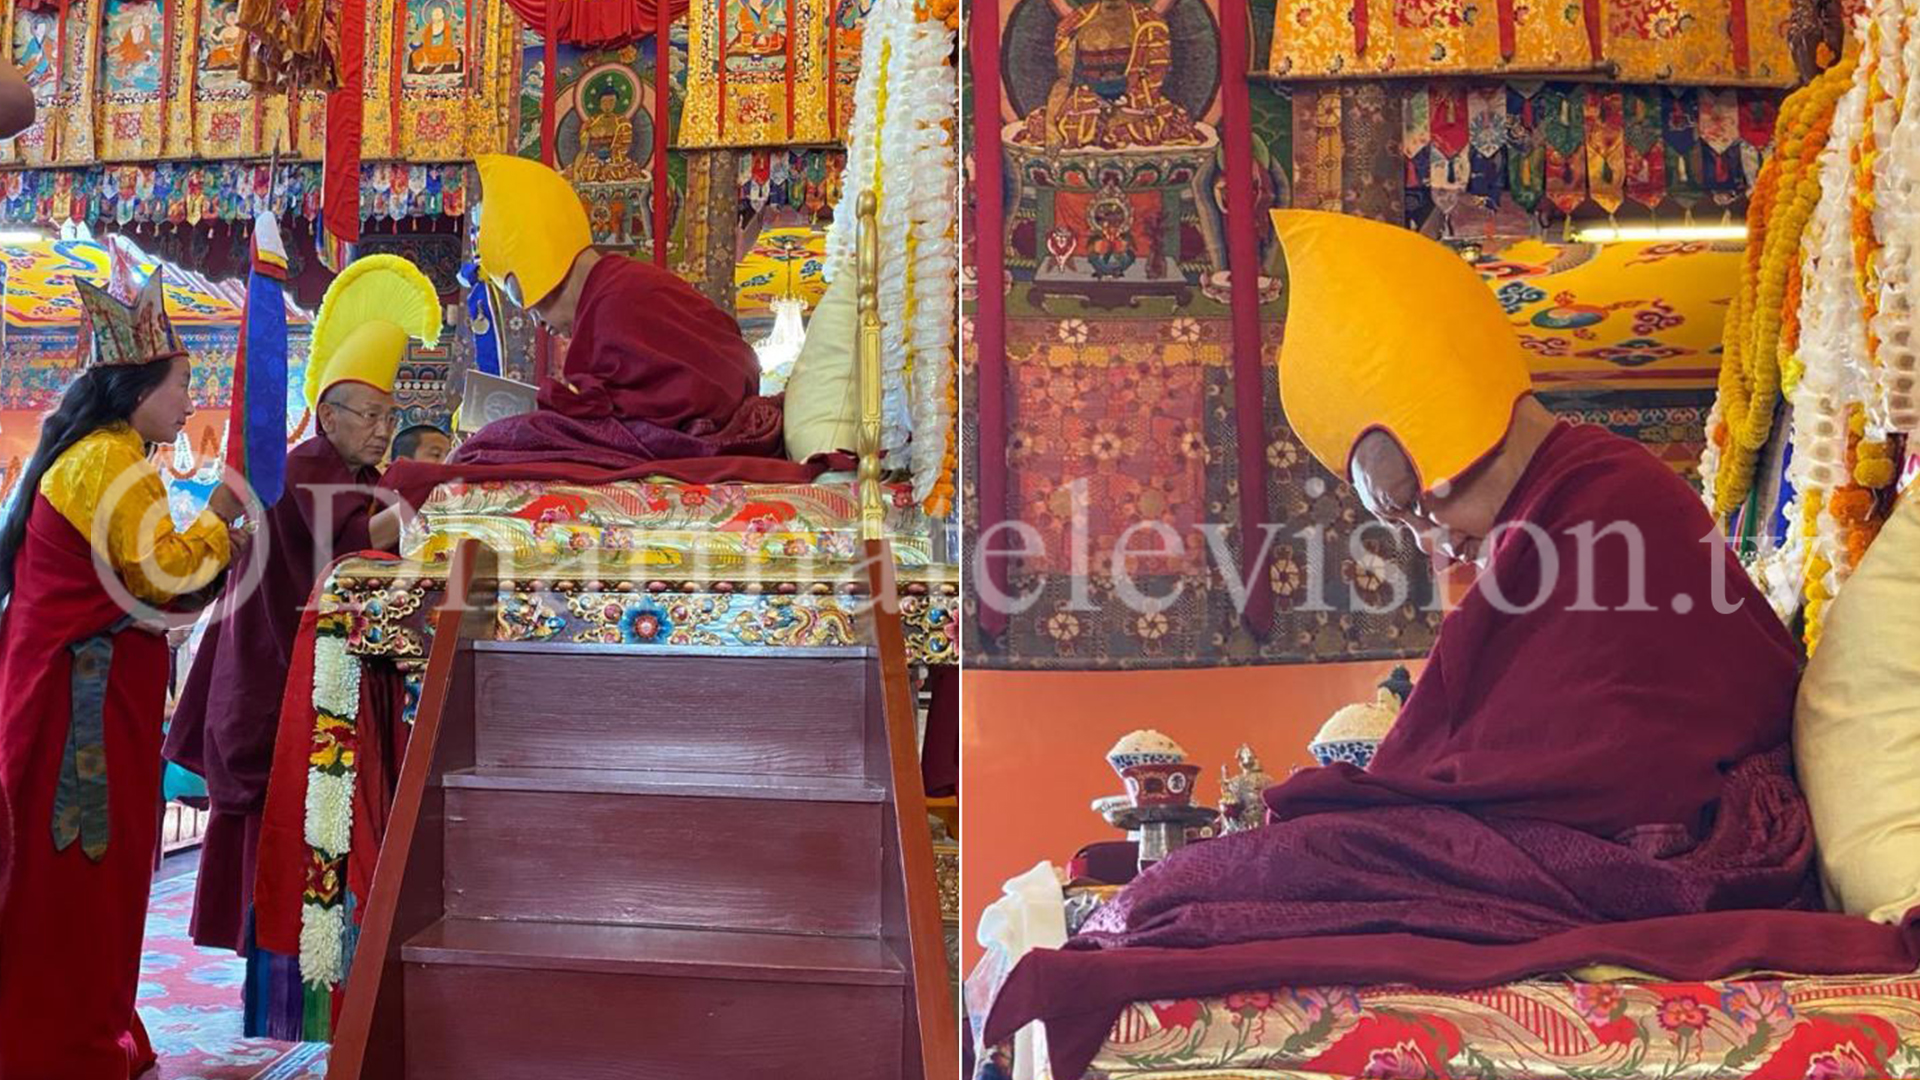 Long life puja for Long life puja for Lama Zopa Rinpoche